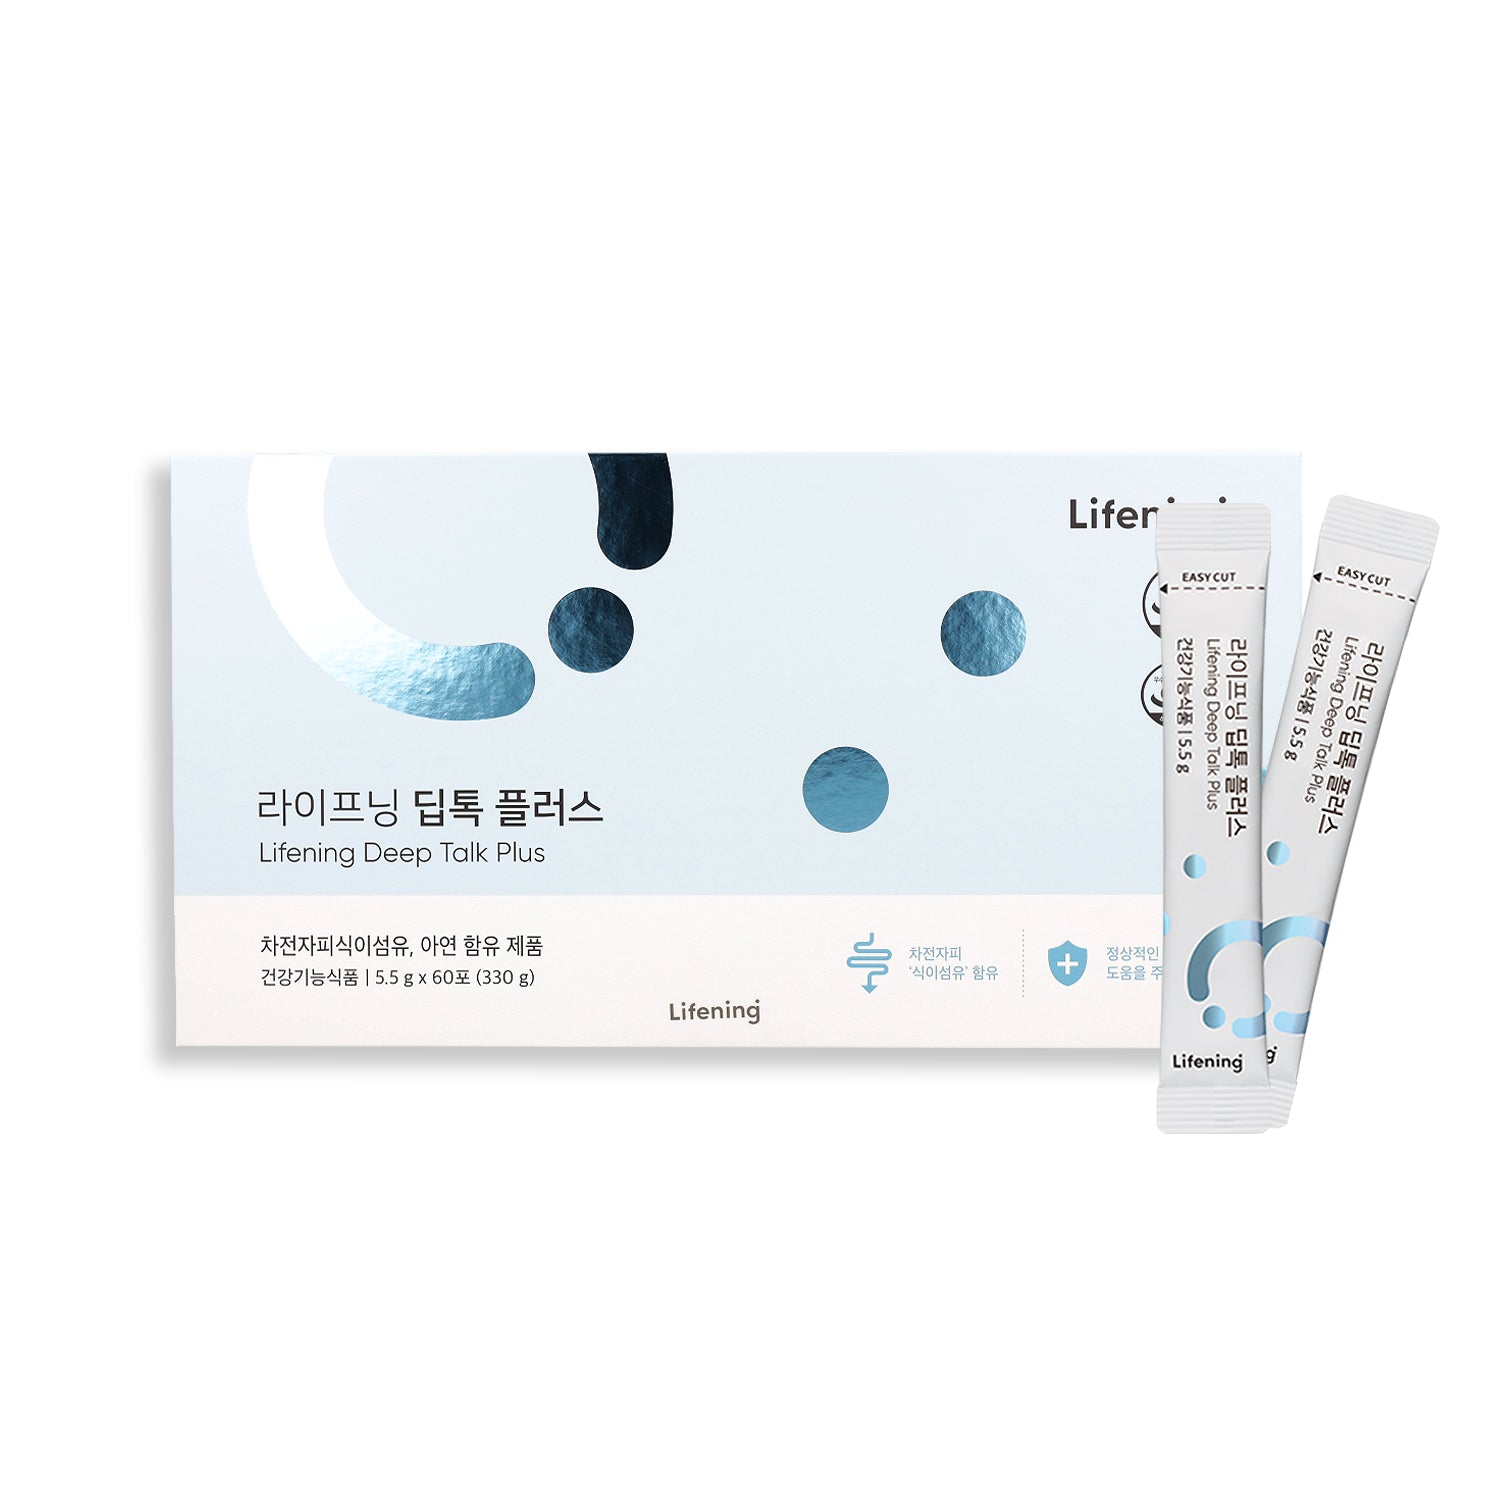 A pack of 60 INCELLDERM Lifening Deep Talks 5.5g each, designed to promote skin health and vitality.